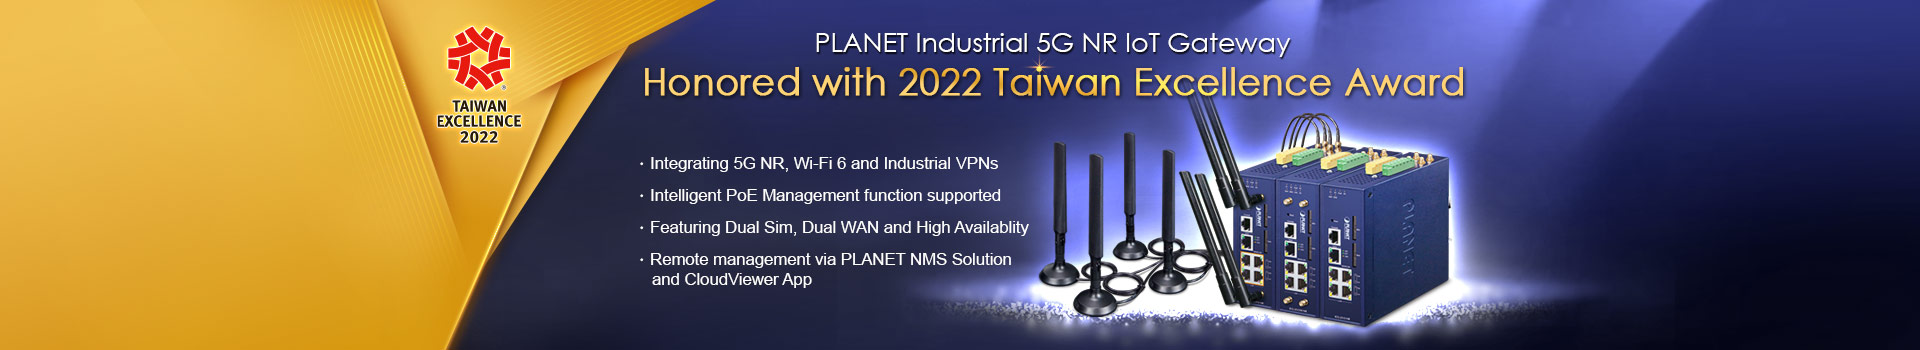 PLANET Industrial 5G NR IoT Gateway, Honored with 2022 Taiwan Excellence Award, Wi-Fi 6, VPNs, High Availability, Dual SIM, Dual WAN, CloudViewer App, NMS Solution